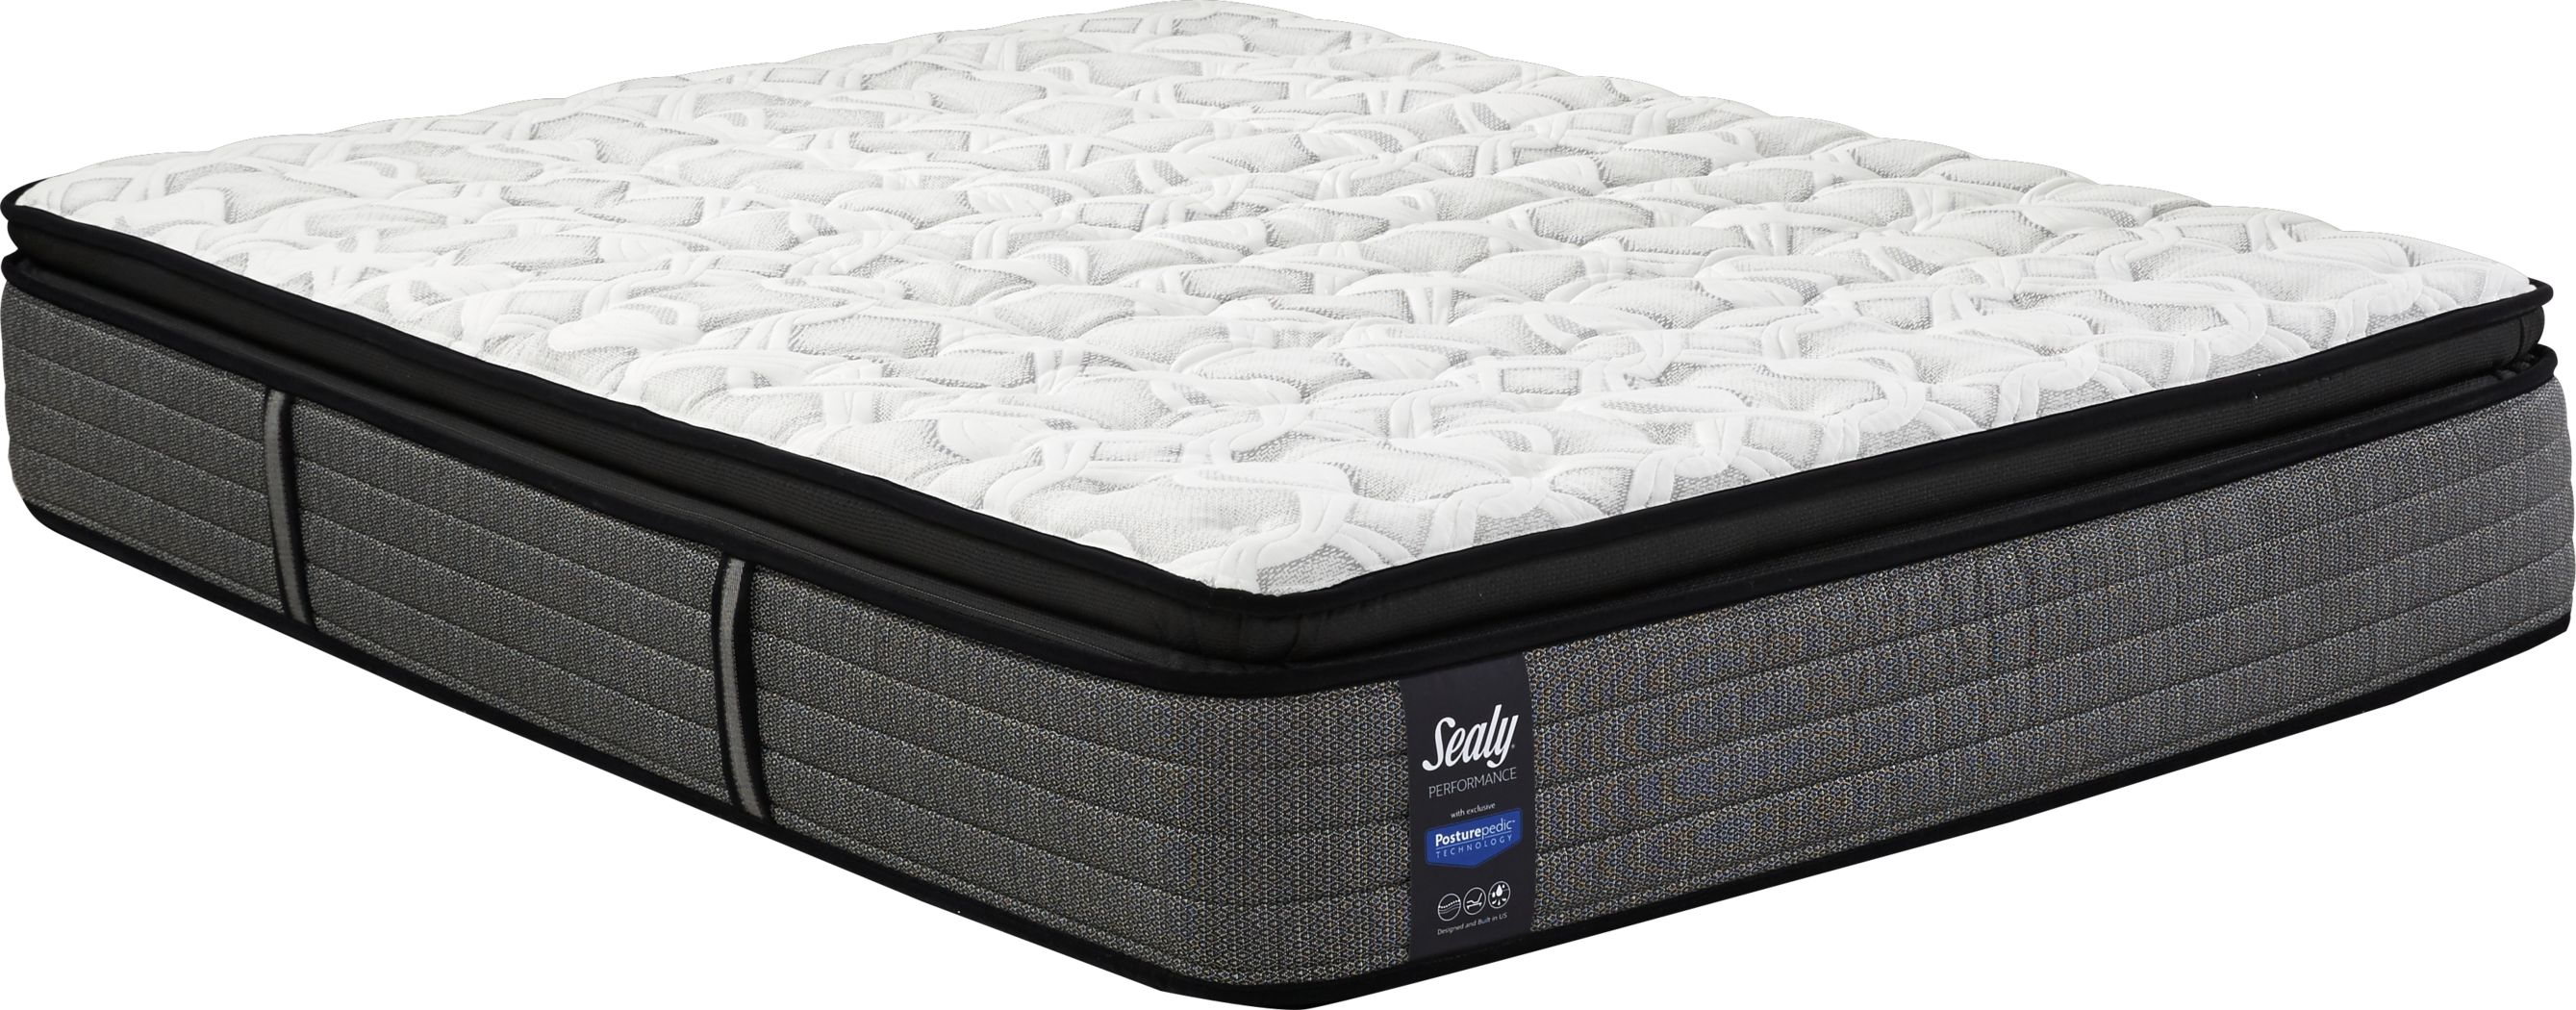 sealy cambria heights firm queen mattress set